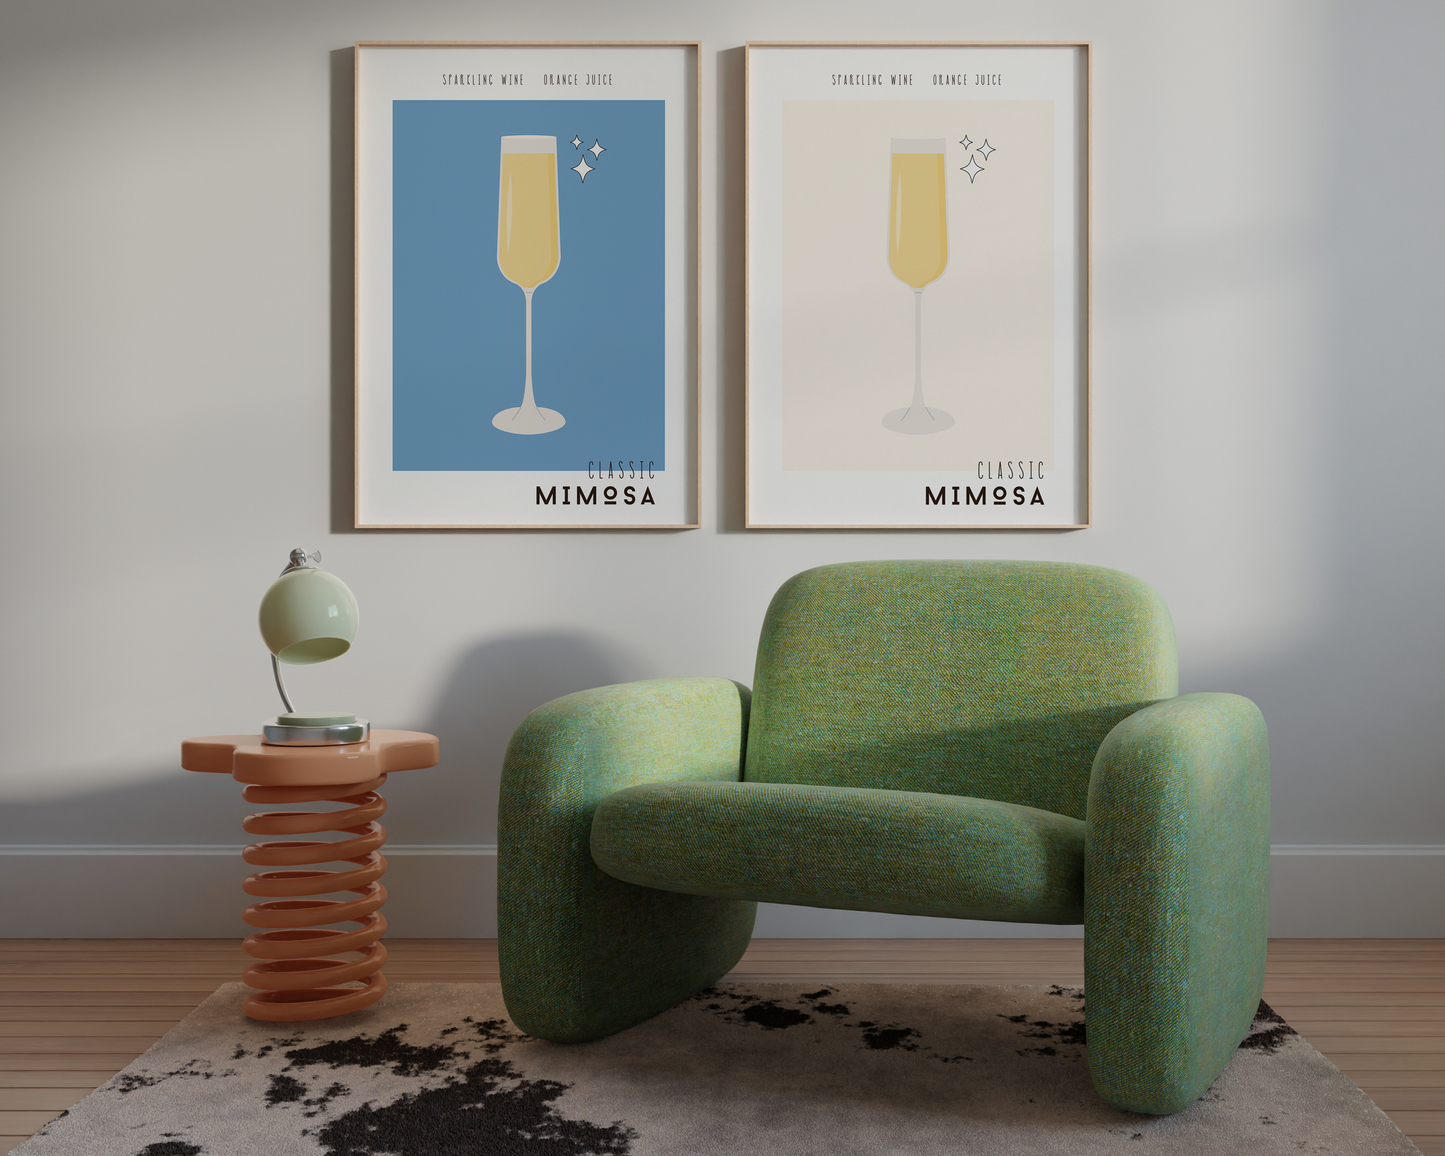 Mimosa Cocktail Poster